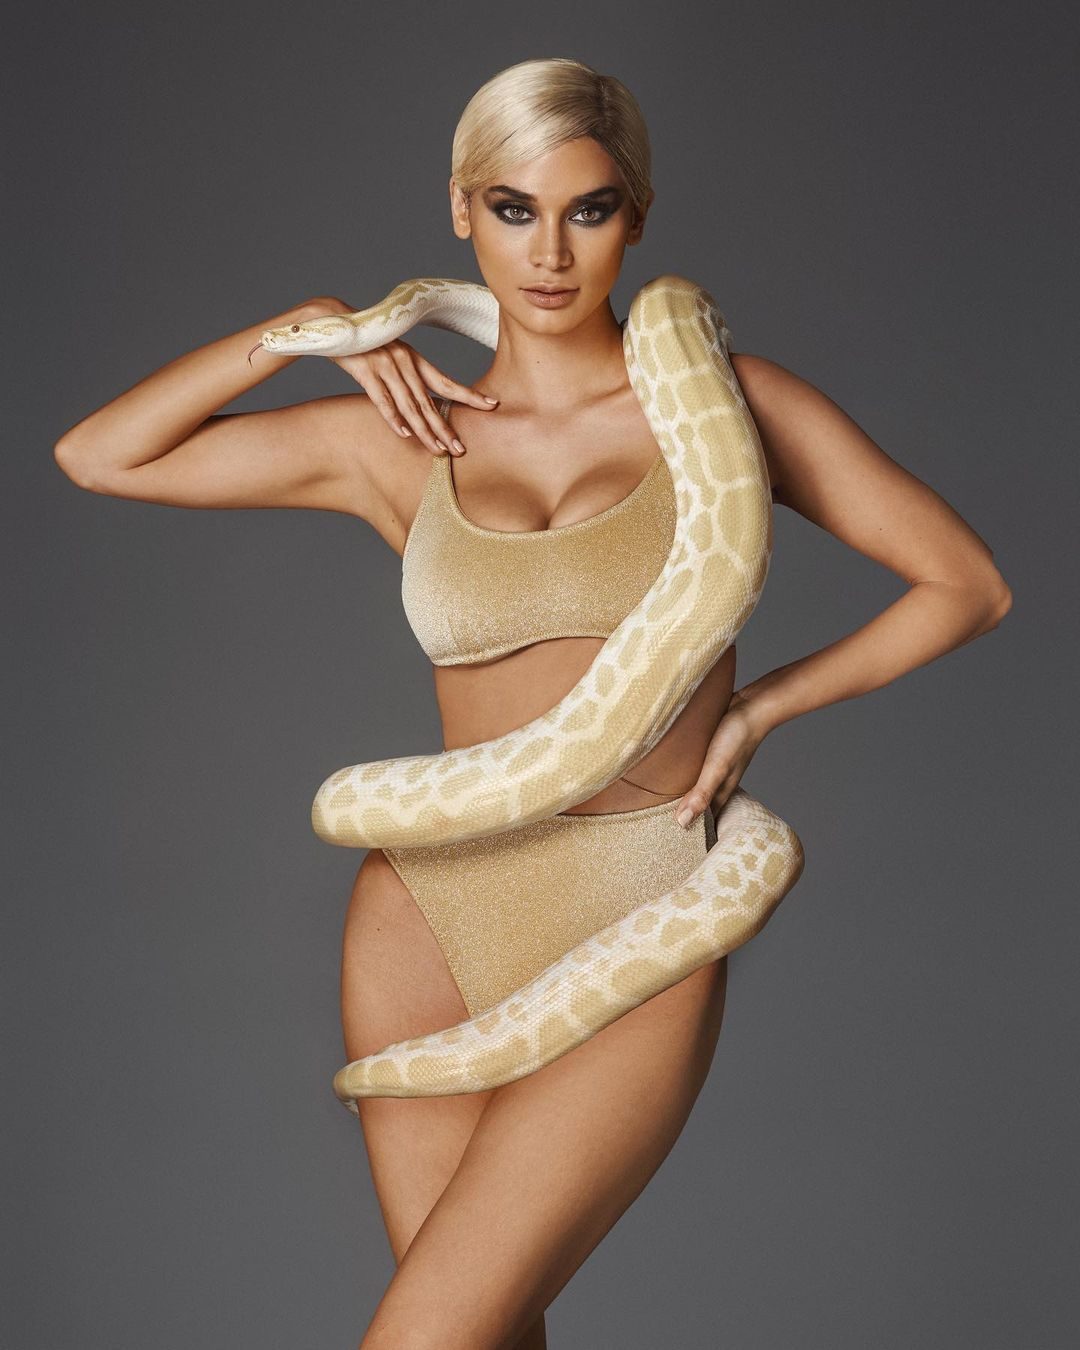 LOOK: Pia Wurtzbach channels Bettie Page, poses with live snakes in new photo shoot